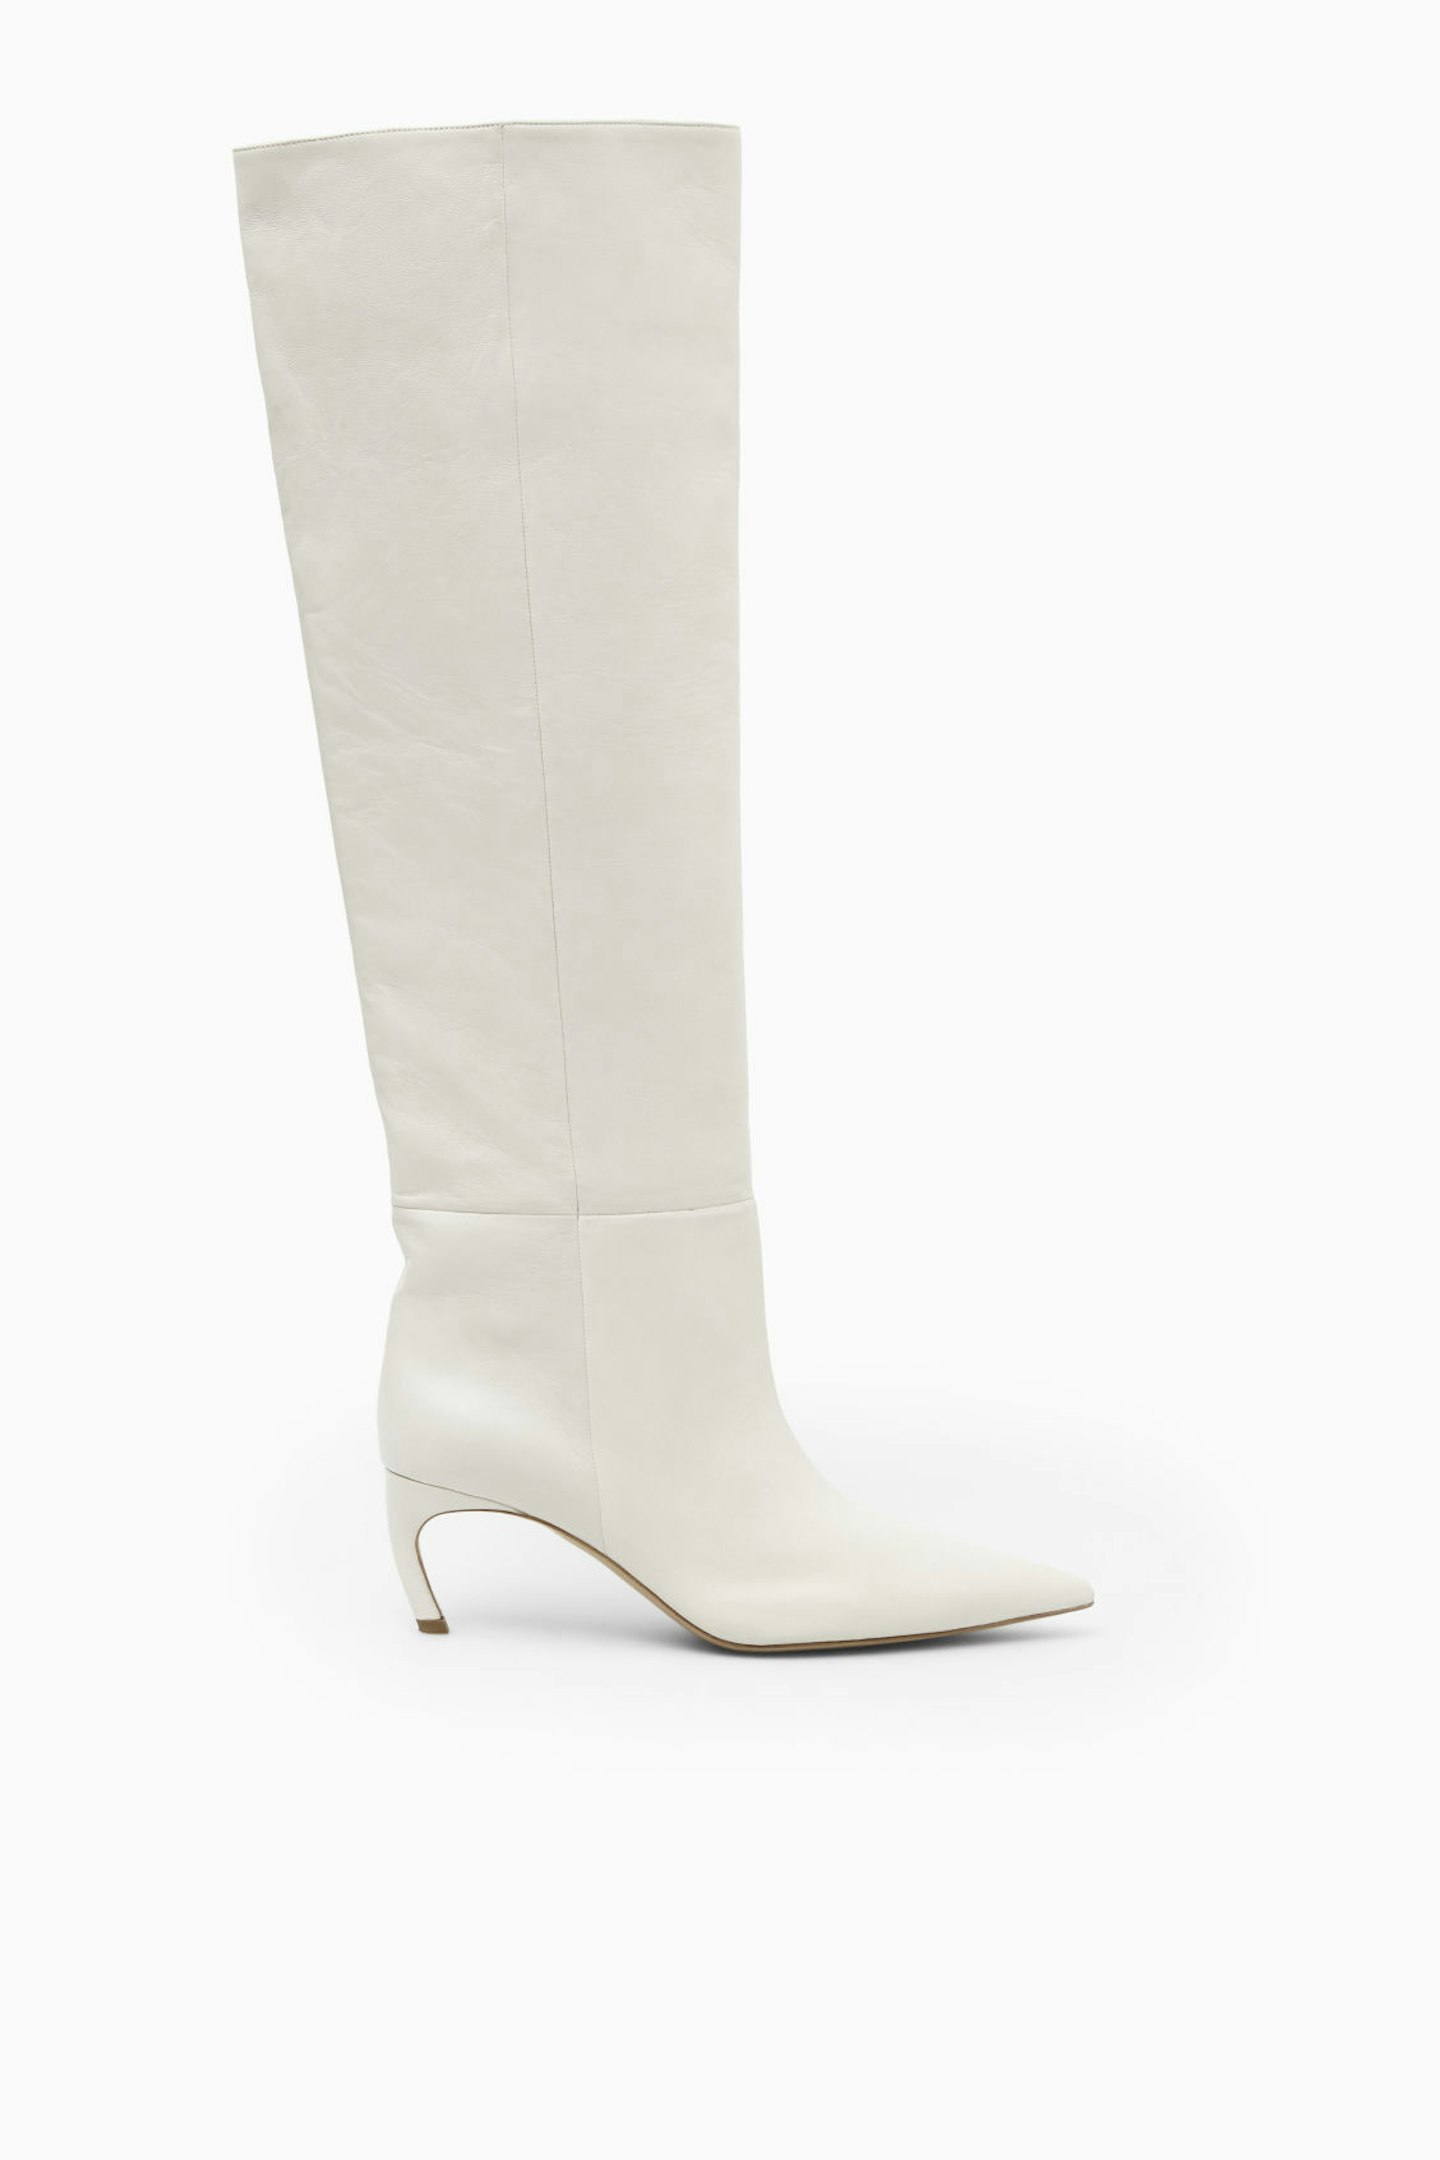 Boots Bare 7 Denier Knee High Natural - Compare Prices & Where To Buy 